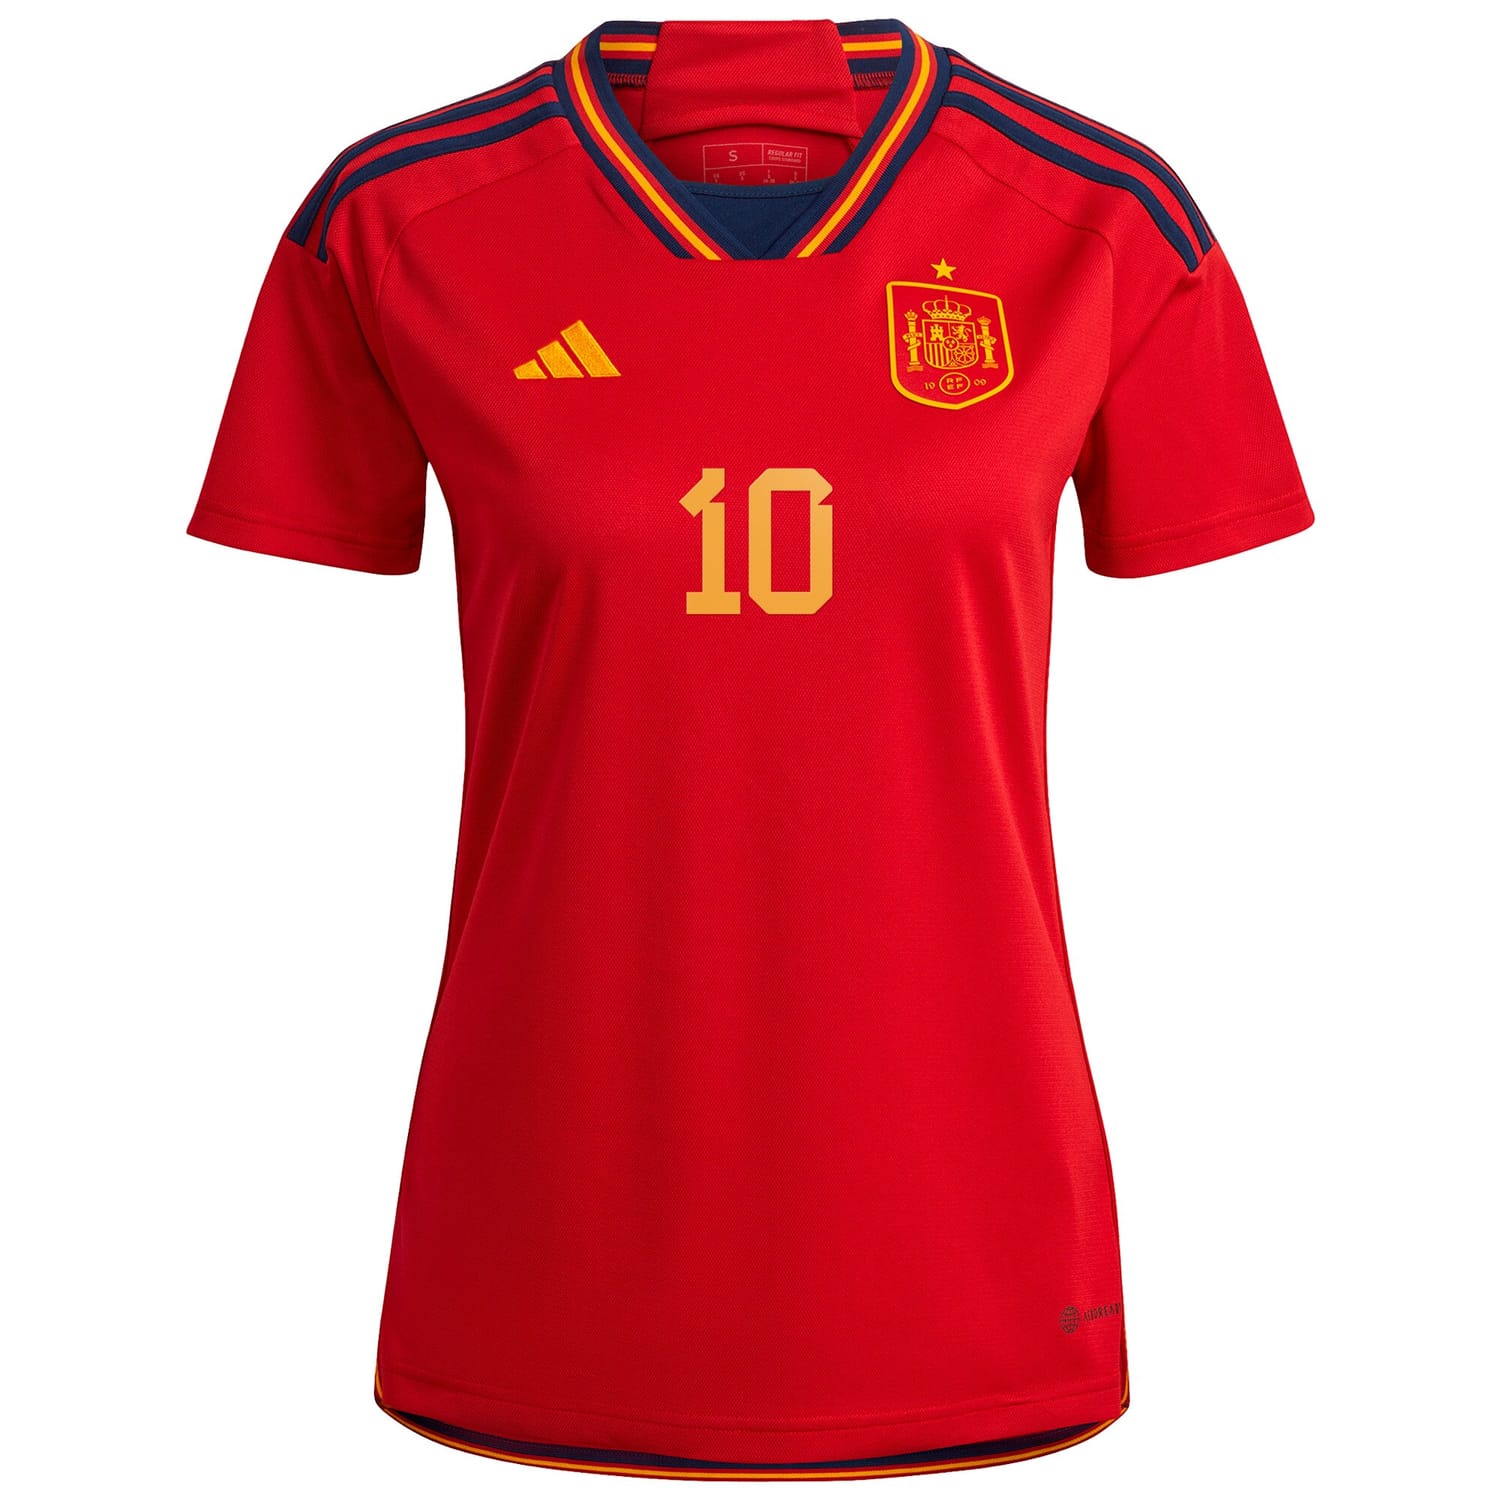 Spain National Team Home Jersey Shirt Red 2022-23 player Pedri printing for Women